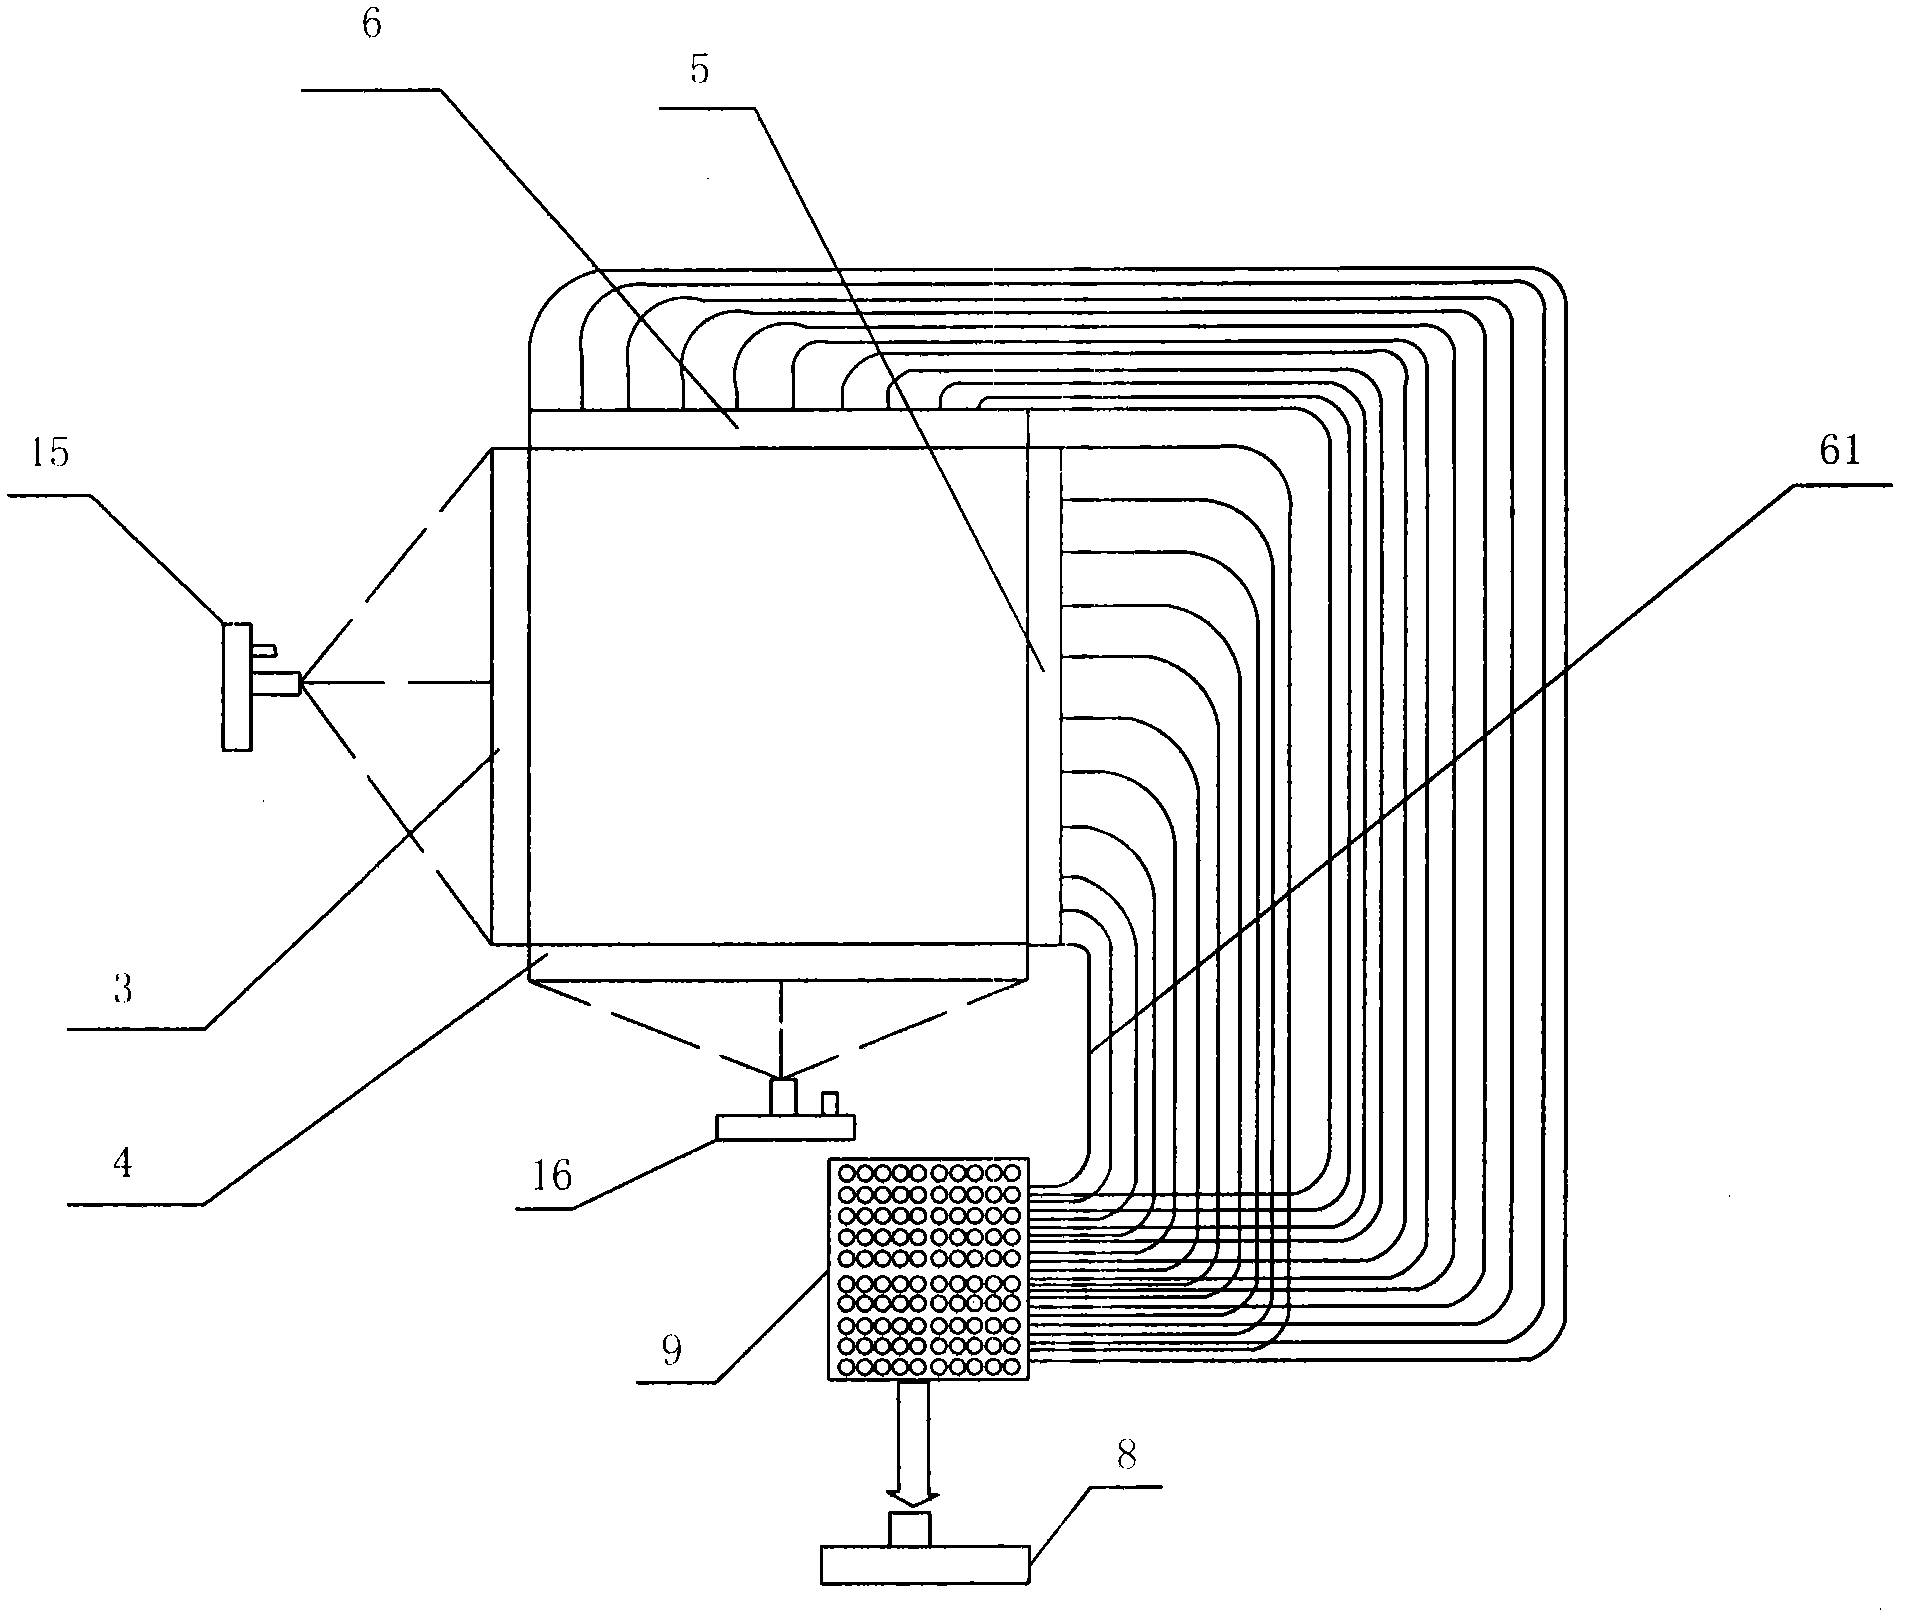 Measurement system for motion parameters of high-speed motion object